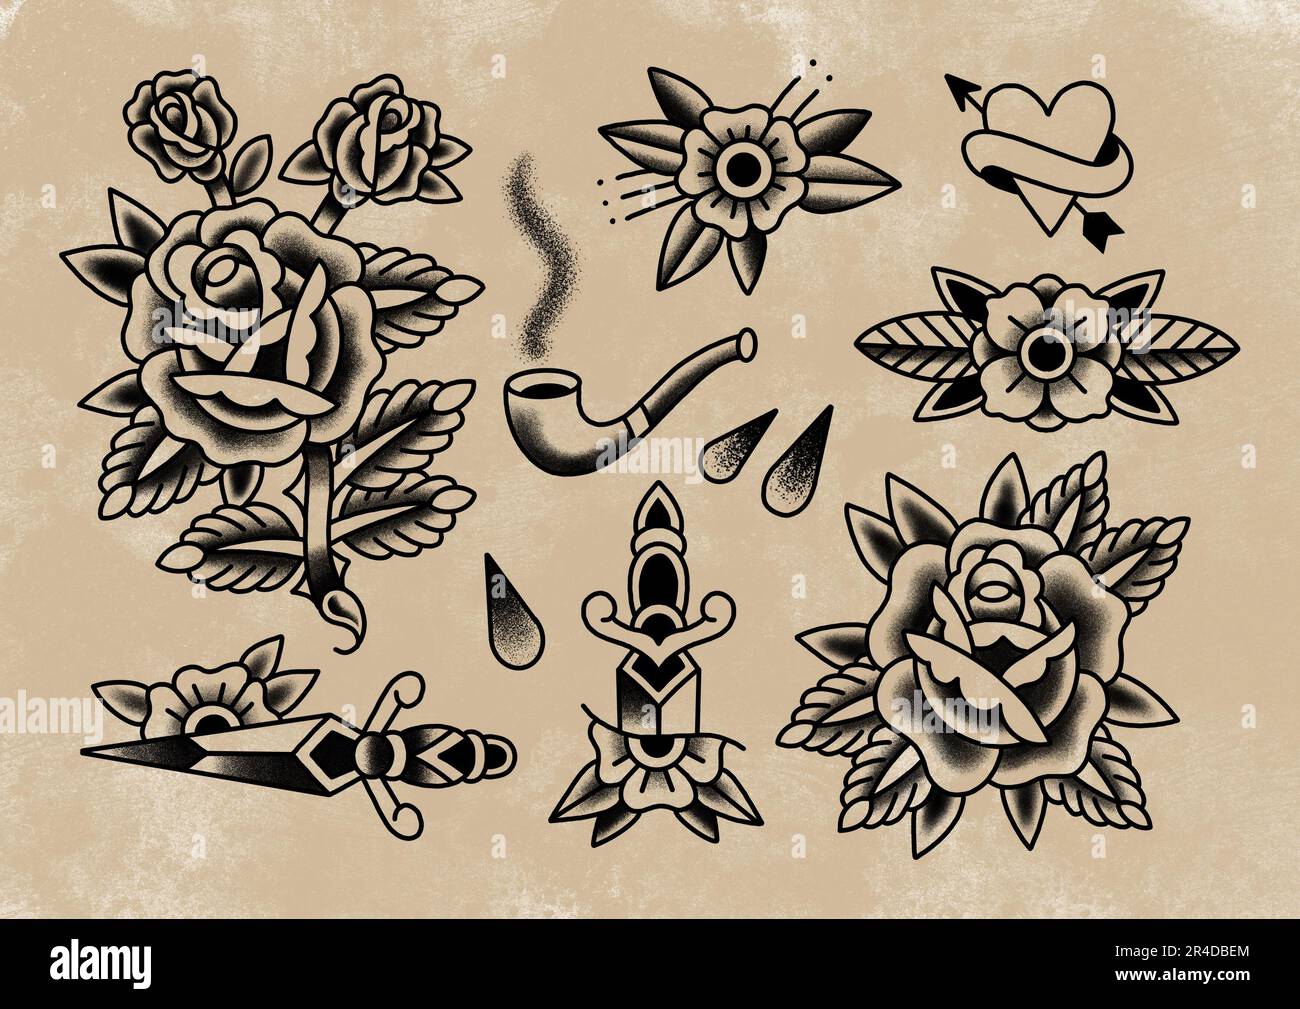 Old School Traditional Tattoo Flash Sheet Designs Black And White 2R4DBEM 